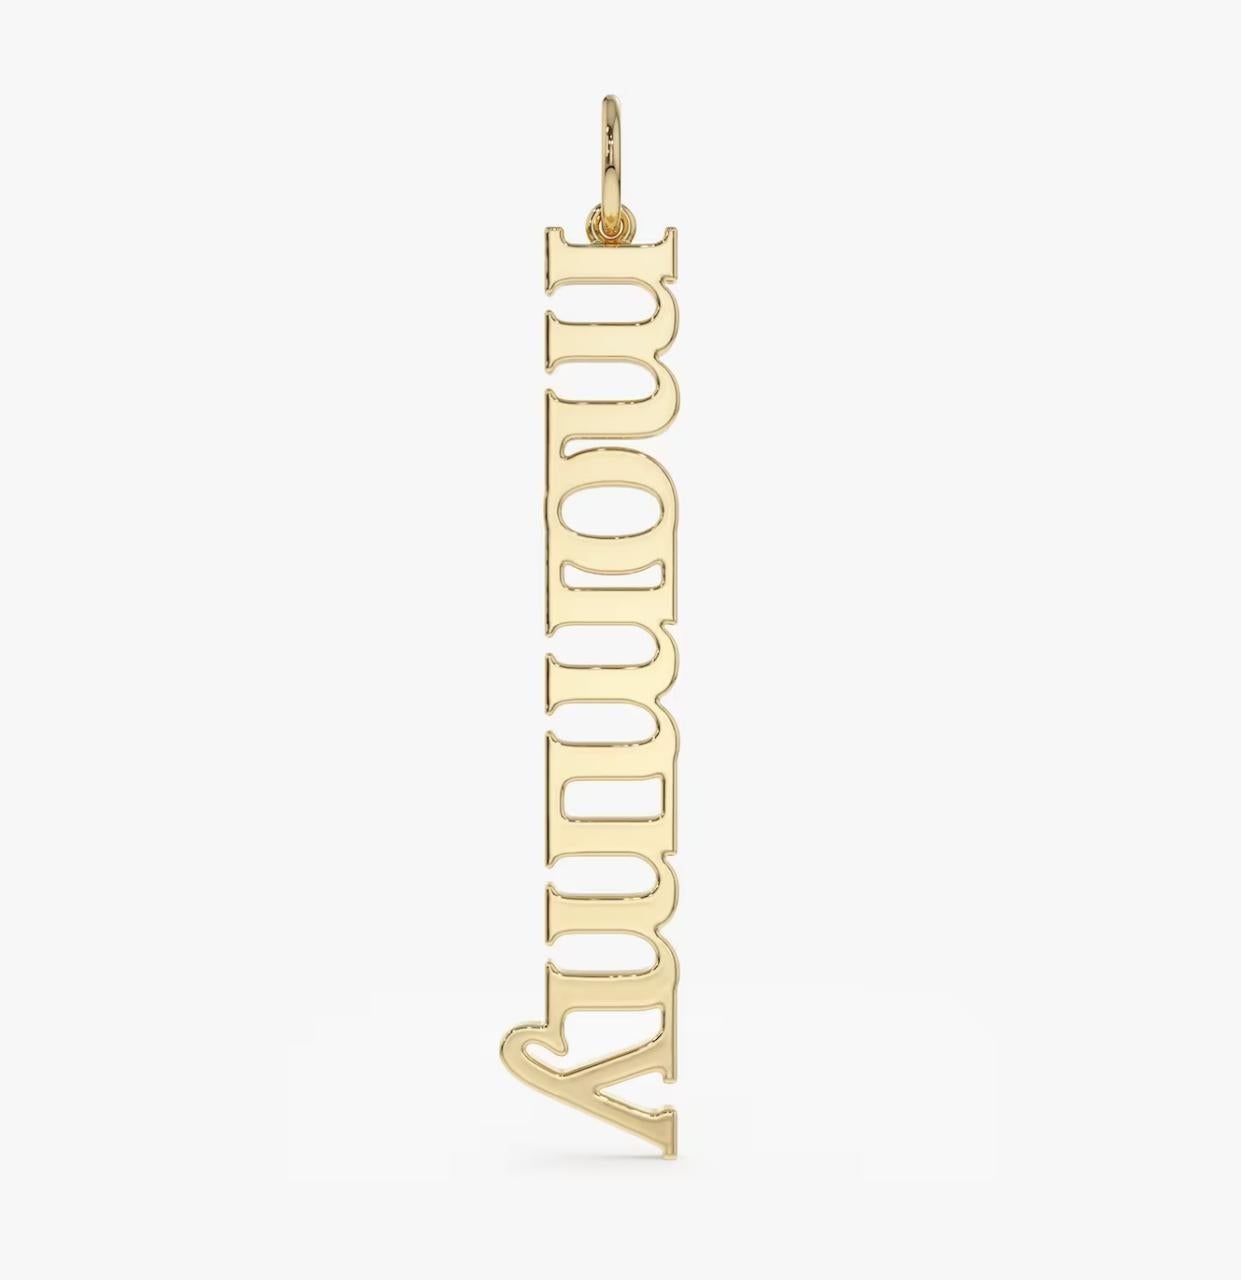 Necklace Information
Metal : 14k
Metal Color : Yellow Gold
Dimensions : 5X33MM
Length : 18 Inches


JEWELRY CARE
Over the course of time, body oil and skin products can collect on Jewelry and leave a residue which can occlude stones. To keep your